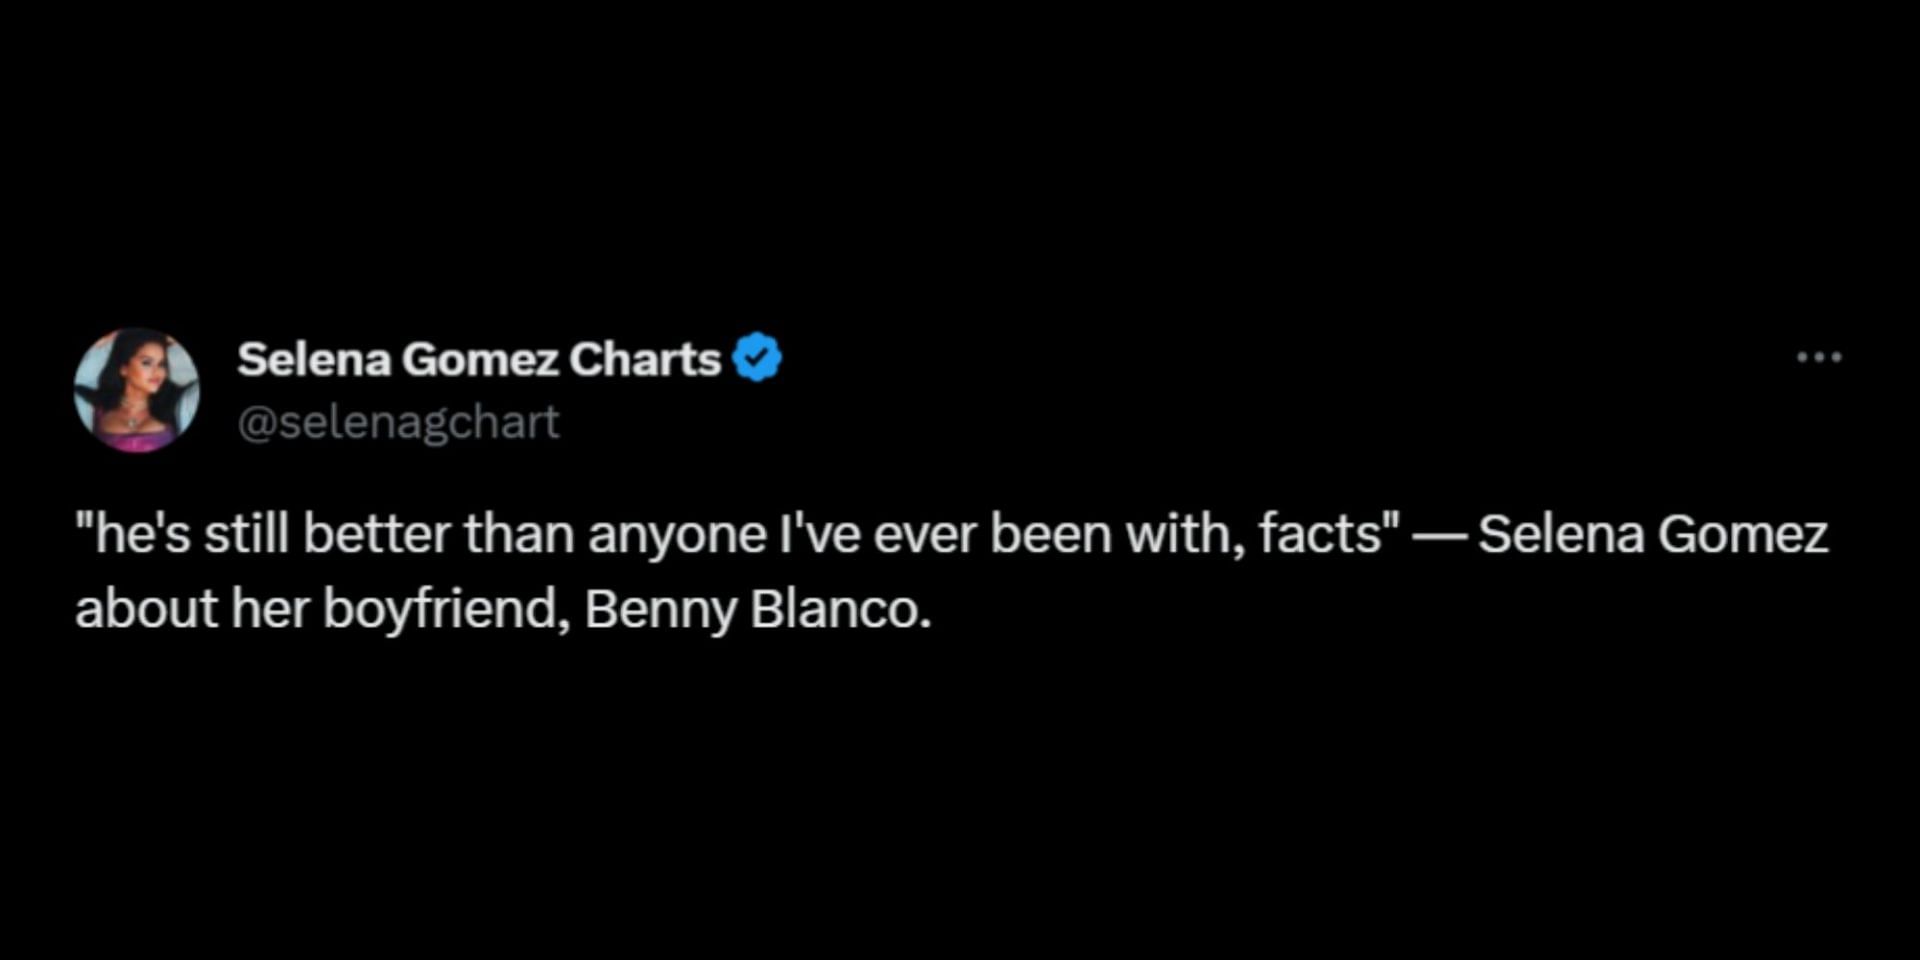 Selena Gomez defended her relationship with Benny Blanco in the past few days. (Image via X/Selena Gomez Charts)